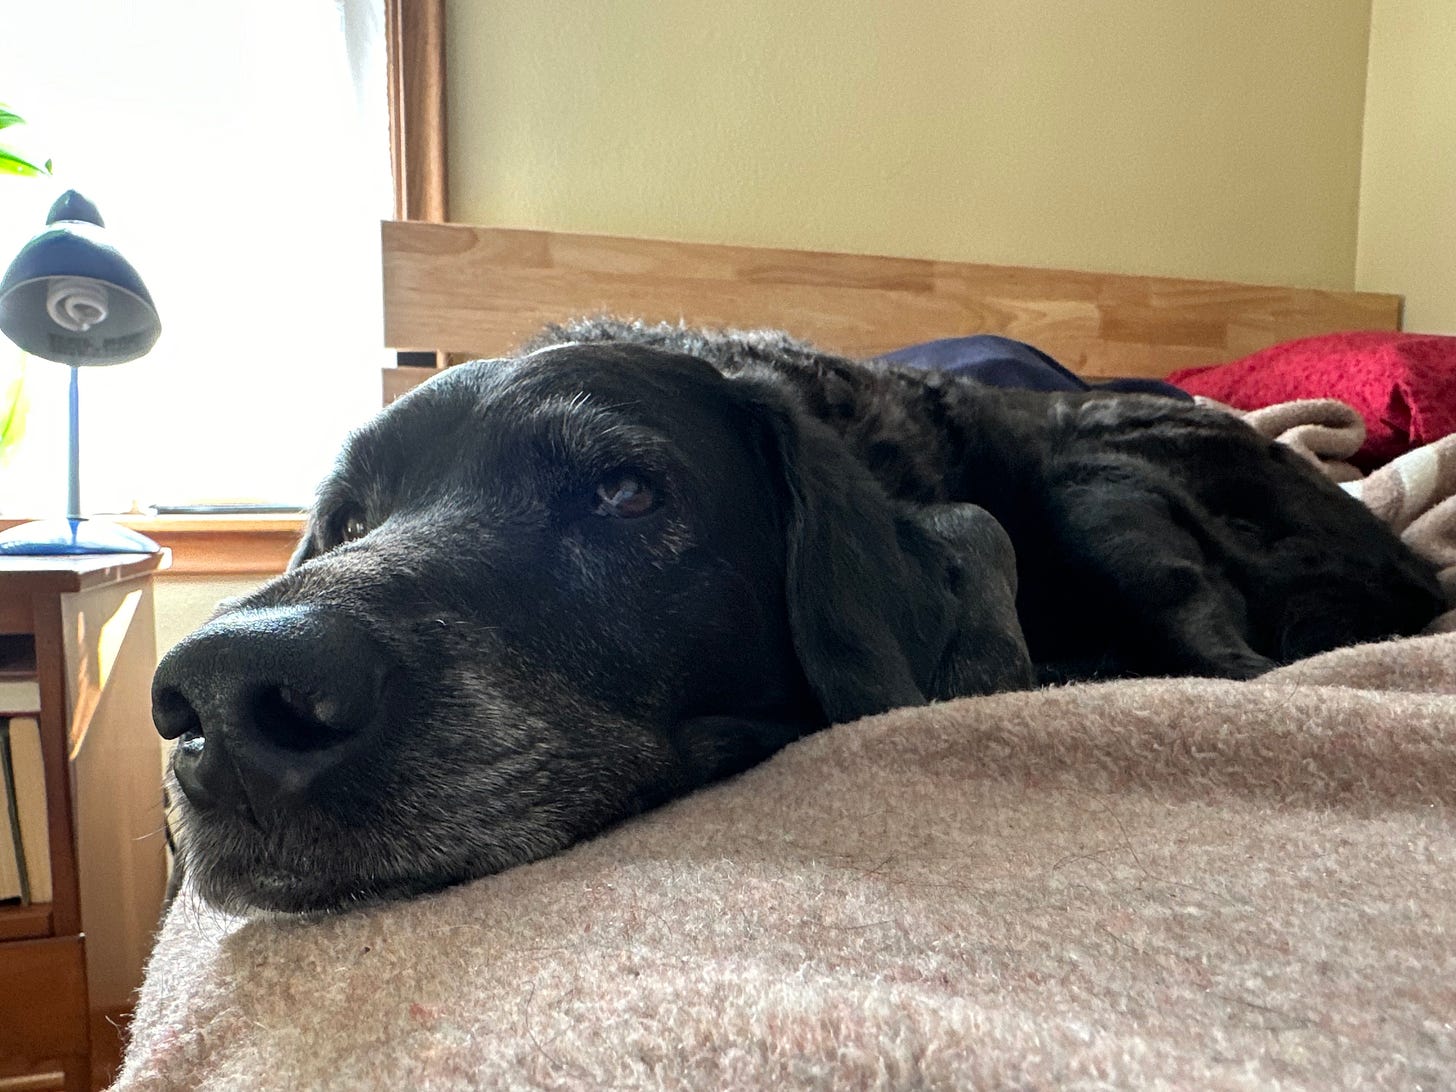 A close up of Ande the black lab on a bed with a lamp and window in the background.